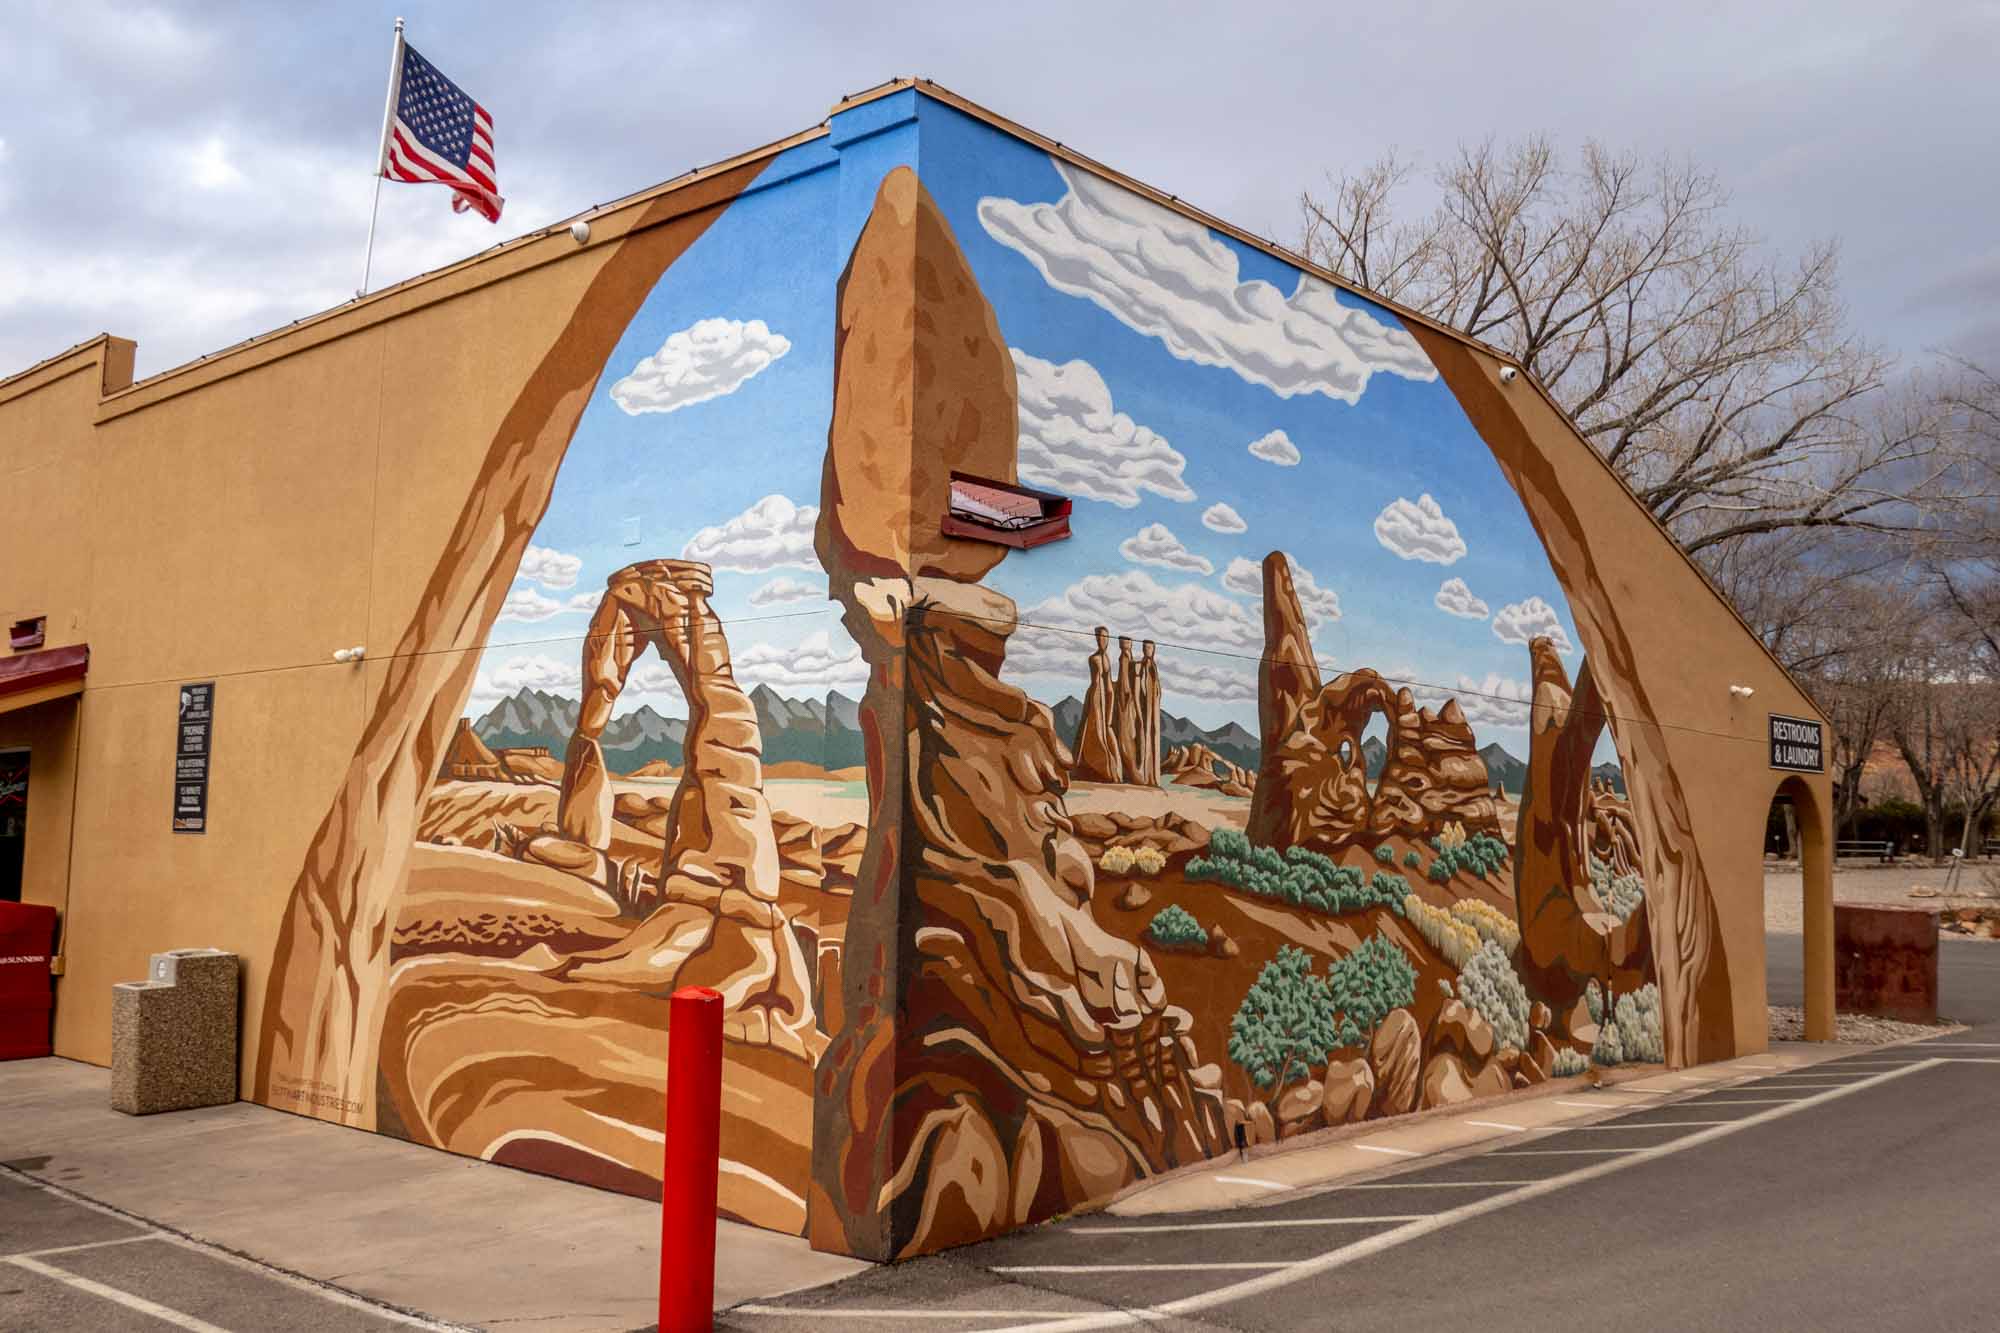 Mural on corner of building of famous formations in Arches National Park